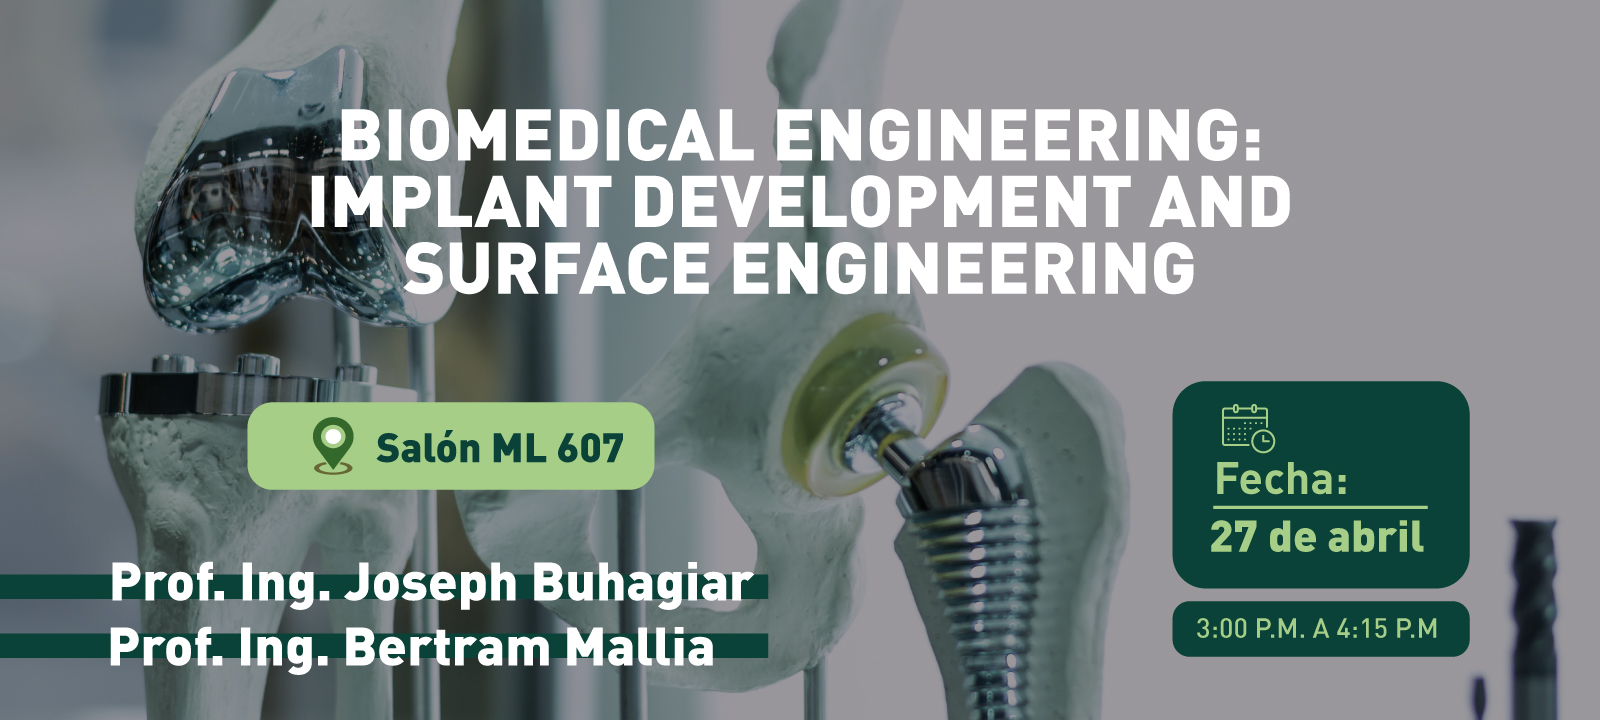 Biomedical Engineering: Implant Development and Surface Engineering